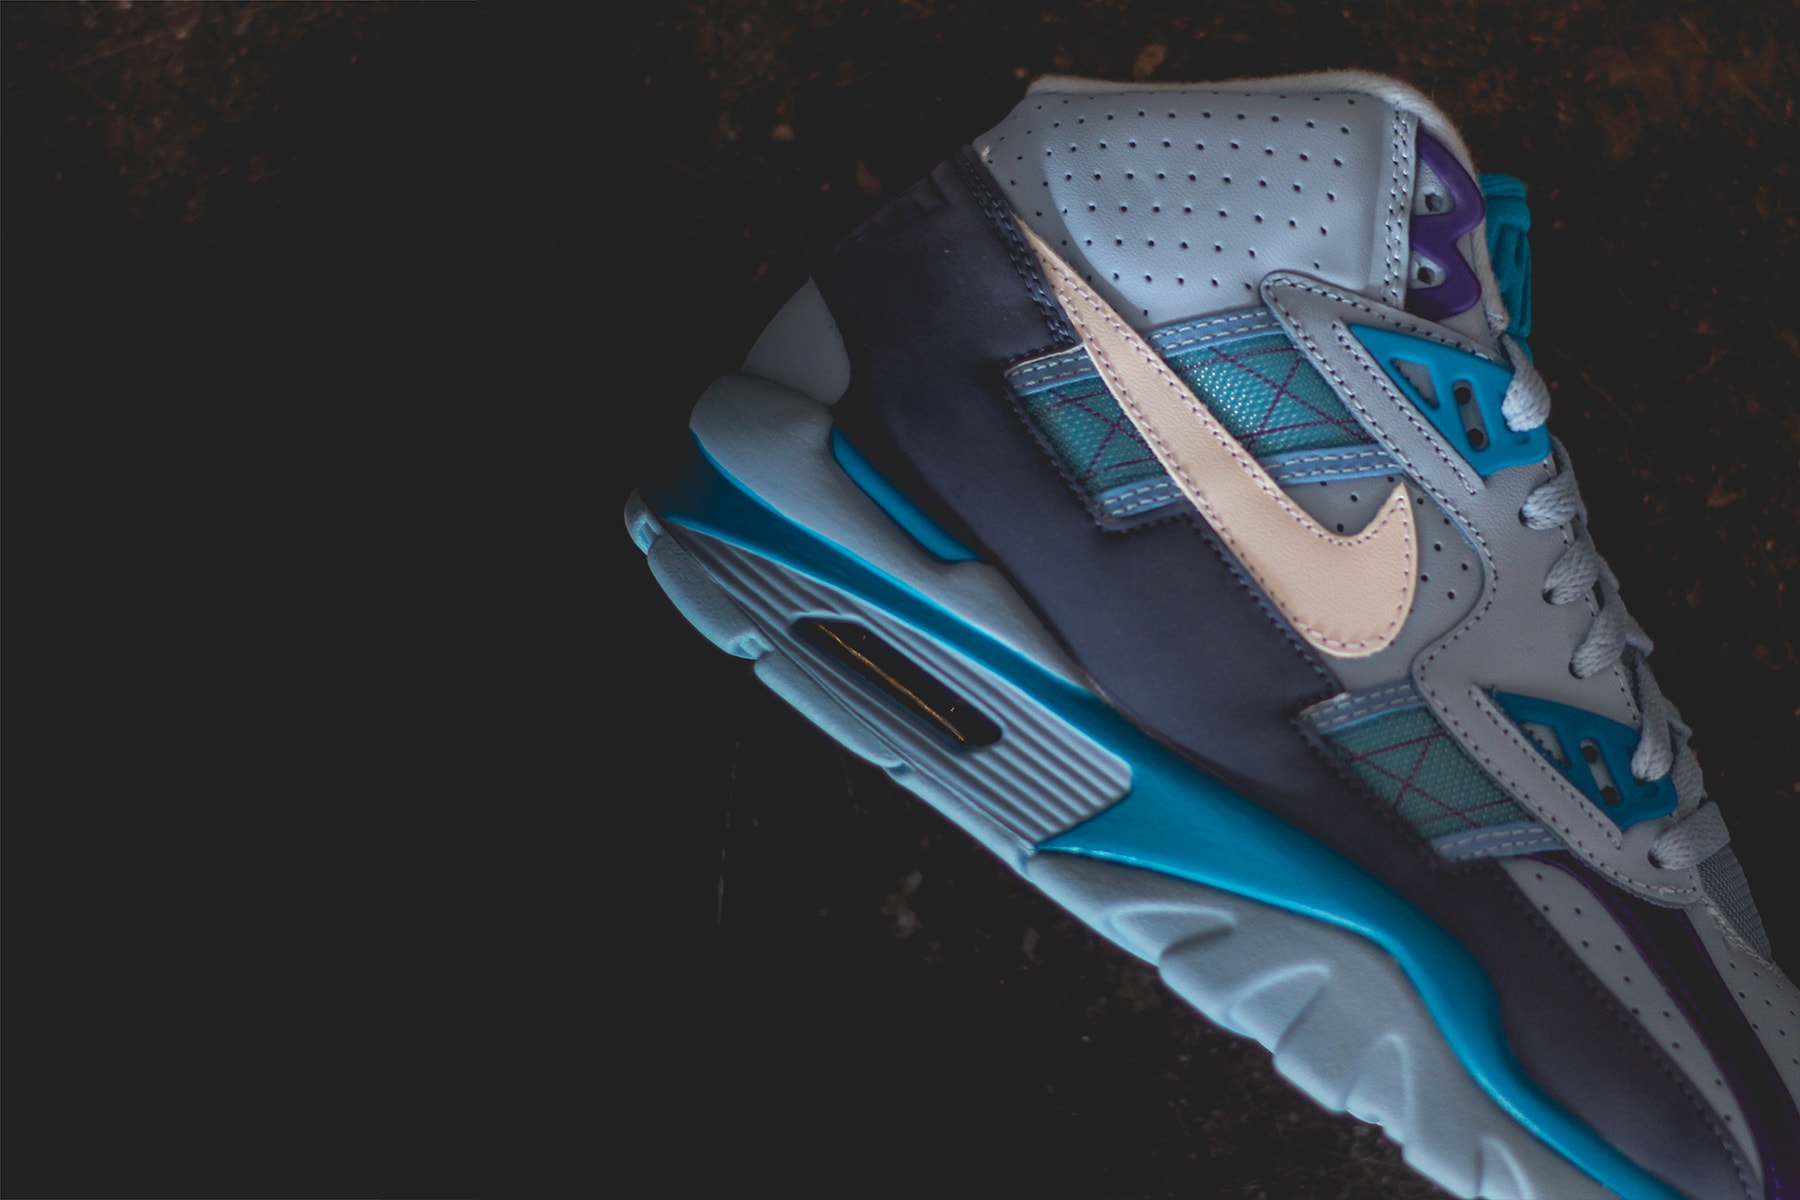 Nike Air Trainer SC high "Lech Blue/Neo Turquiose" release purchase